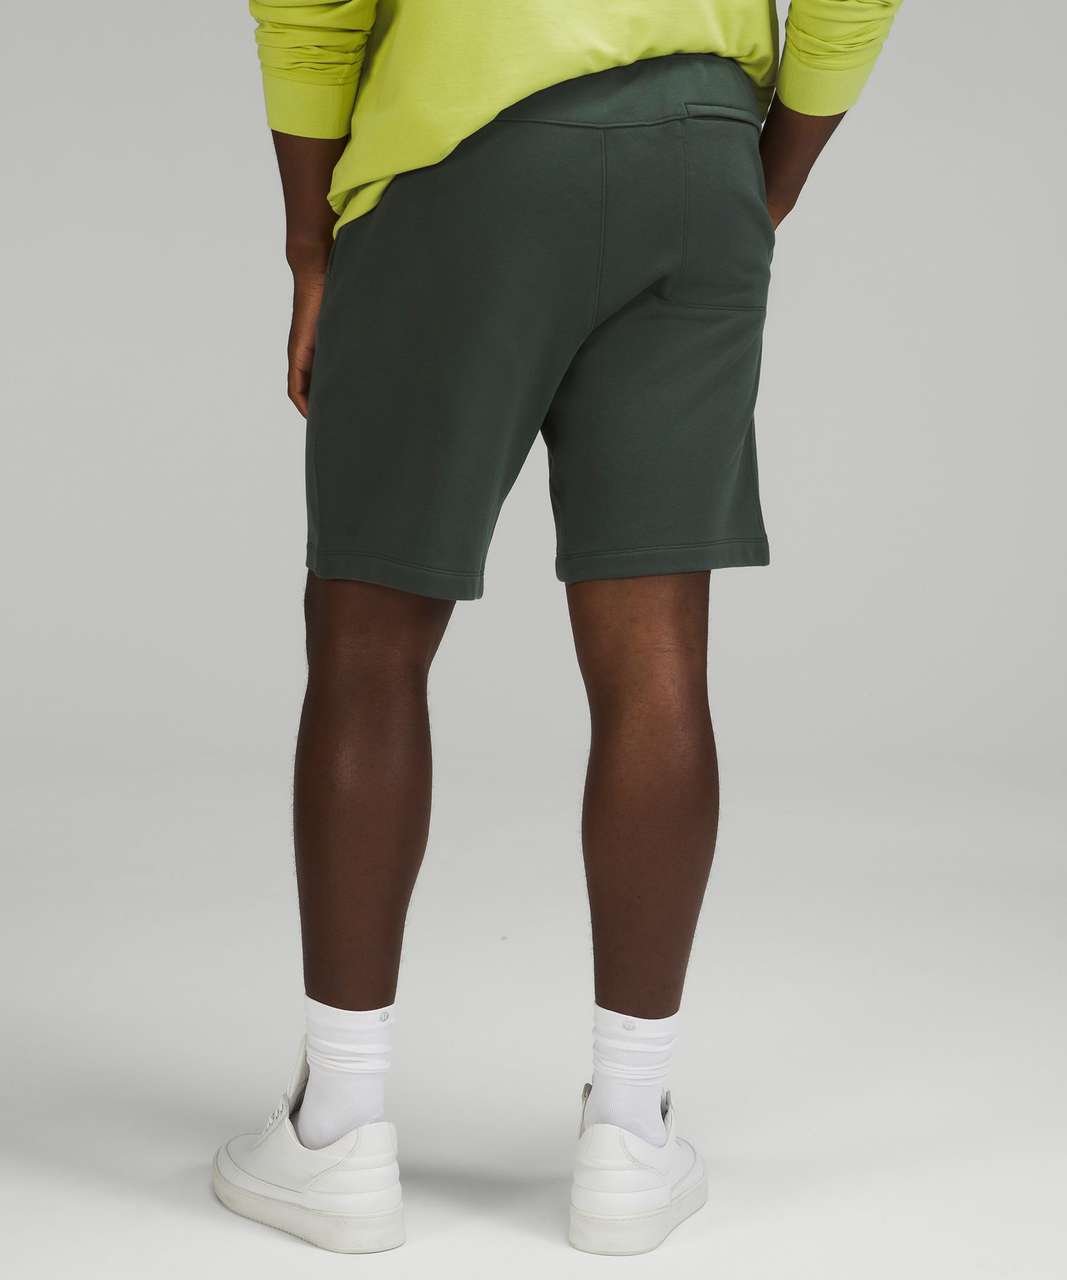 Lululemon Relaxed-Fit French Terry Short 9" - Smoked Spruce